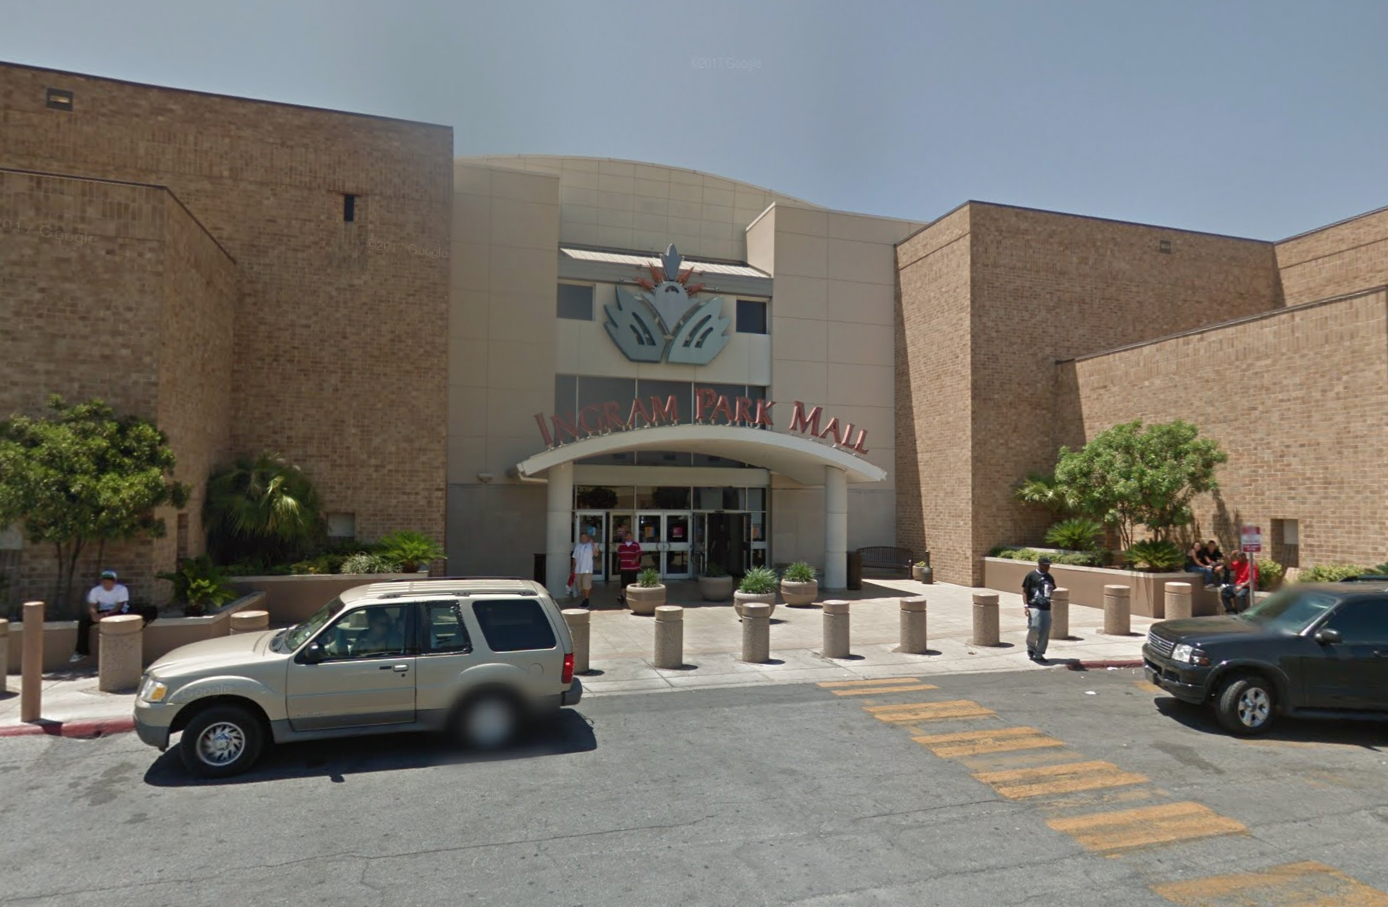 Ingram Park Mall is one of the best places to shop in San Antonio